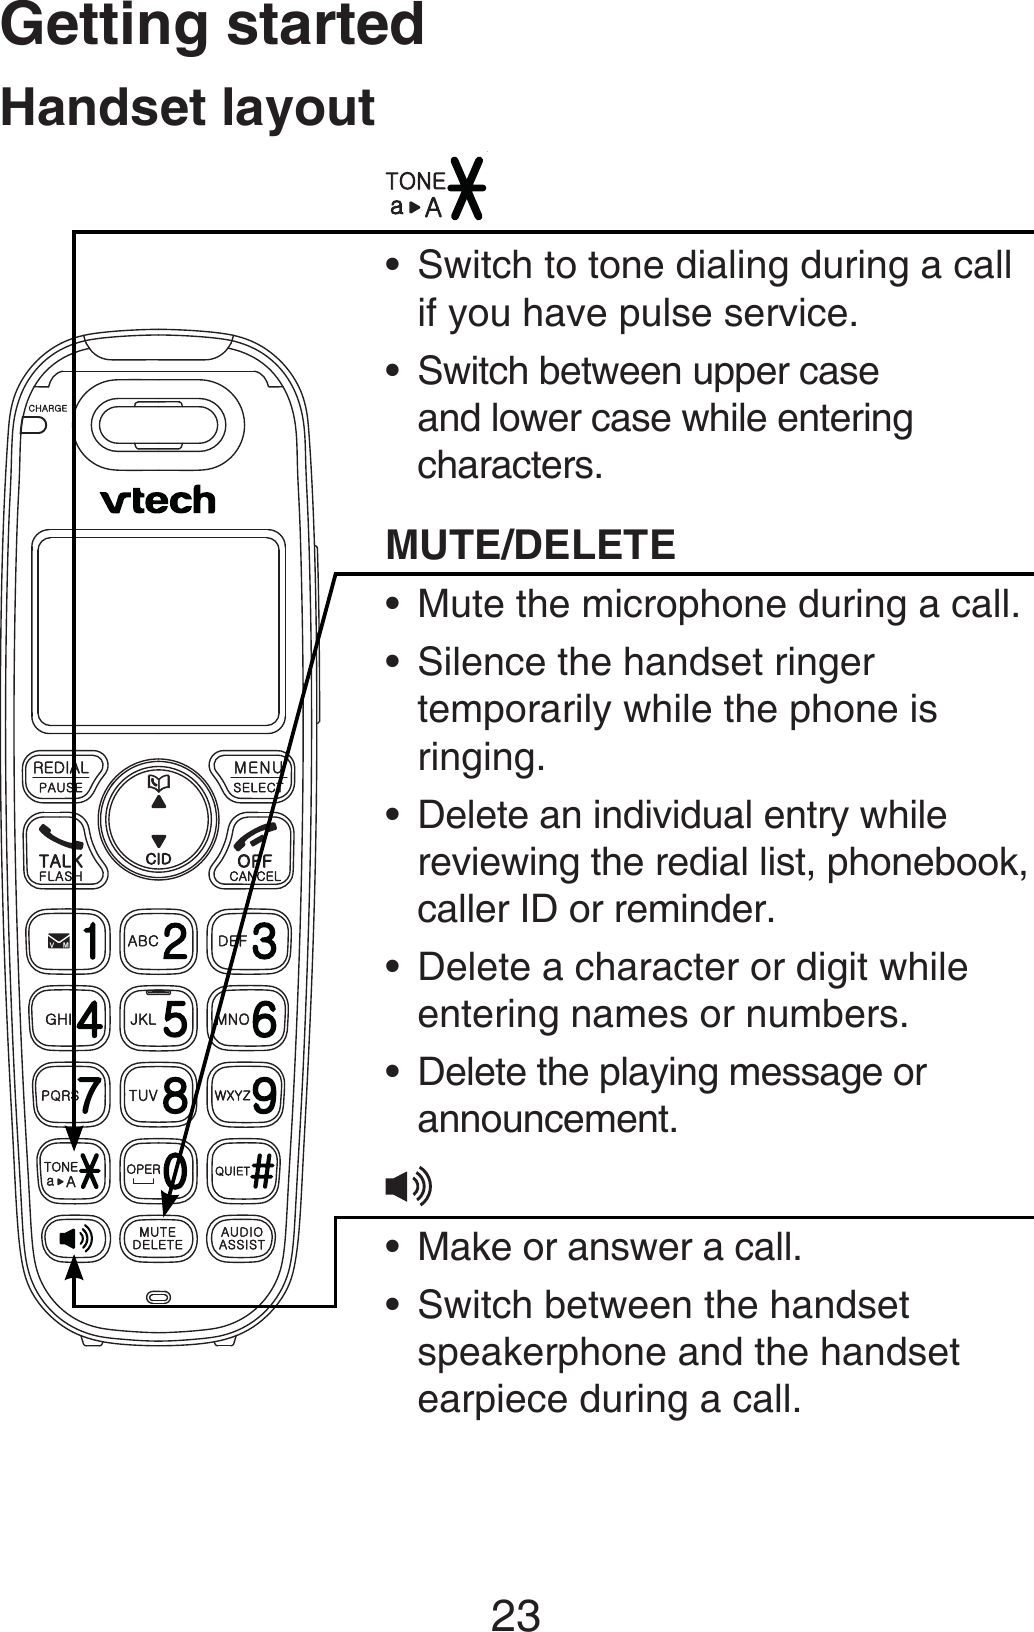 Getting started23Switch to tone dialing during a call if you have pulse service.Switch between upper case and lower case while entering characters.MUTE/DELETEMute the microphone during a call.Silence the handset ringer temporarily while the phone is ringing.Delete an individual entry while reviewing the redial list, phonebook, caller ID or reminder.Delete a character or digit while entering names or numbers.Delete the playing message or announcement.Make or answer a call.Switch between the handset speakerphone and the handset earpiece during a call.•••••••••Handset layout